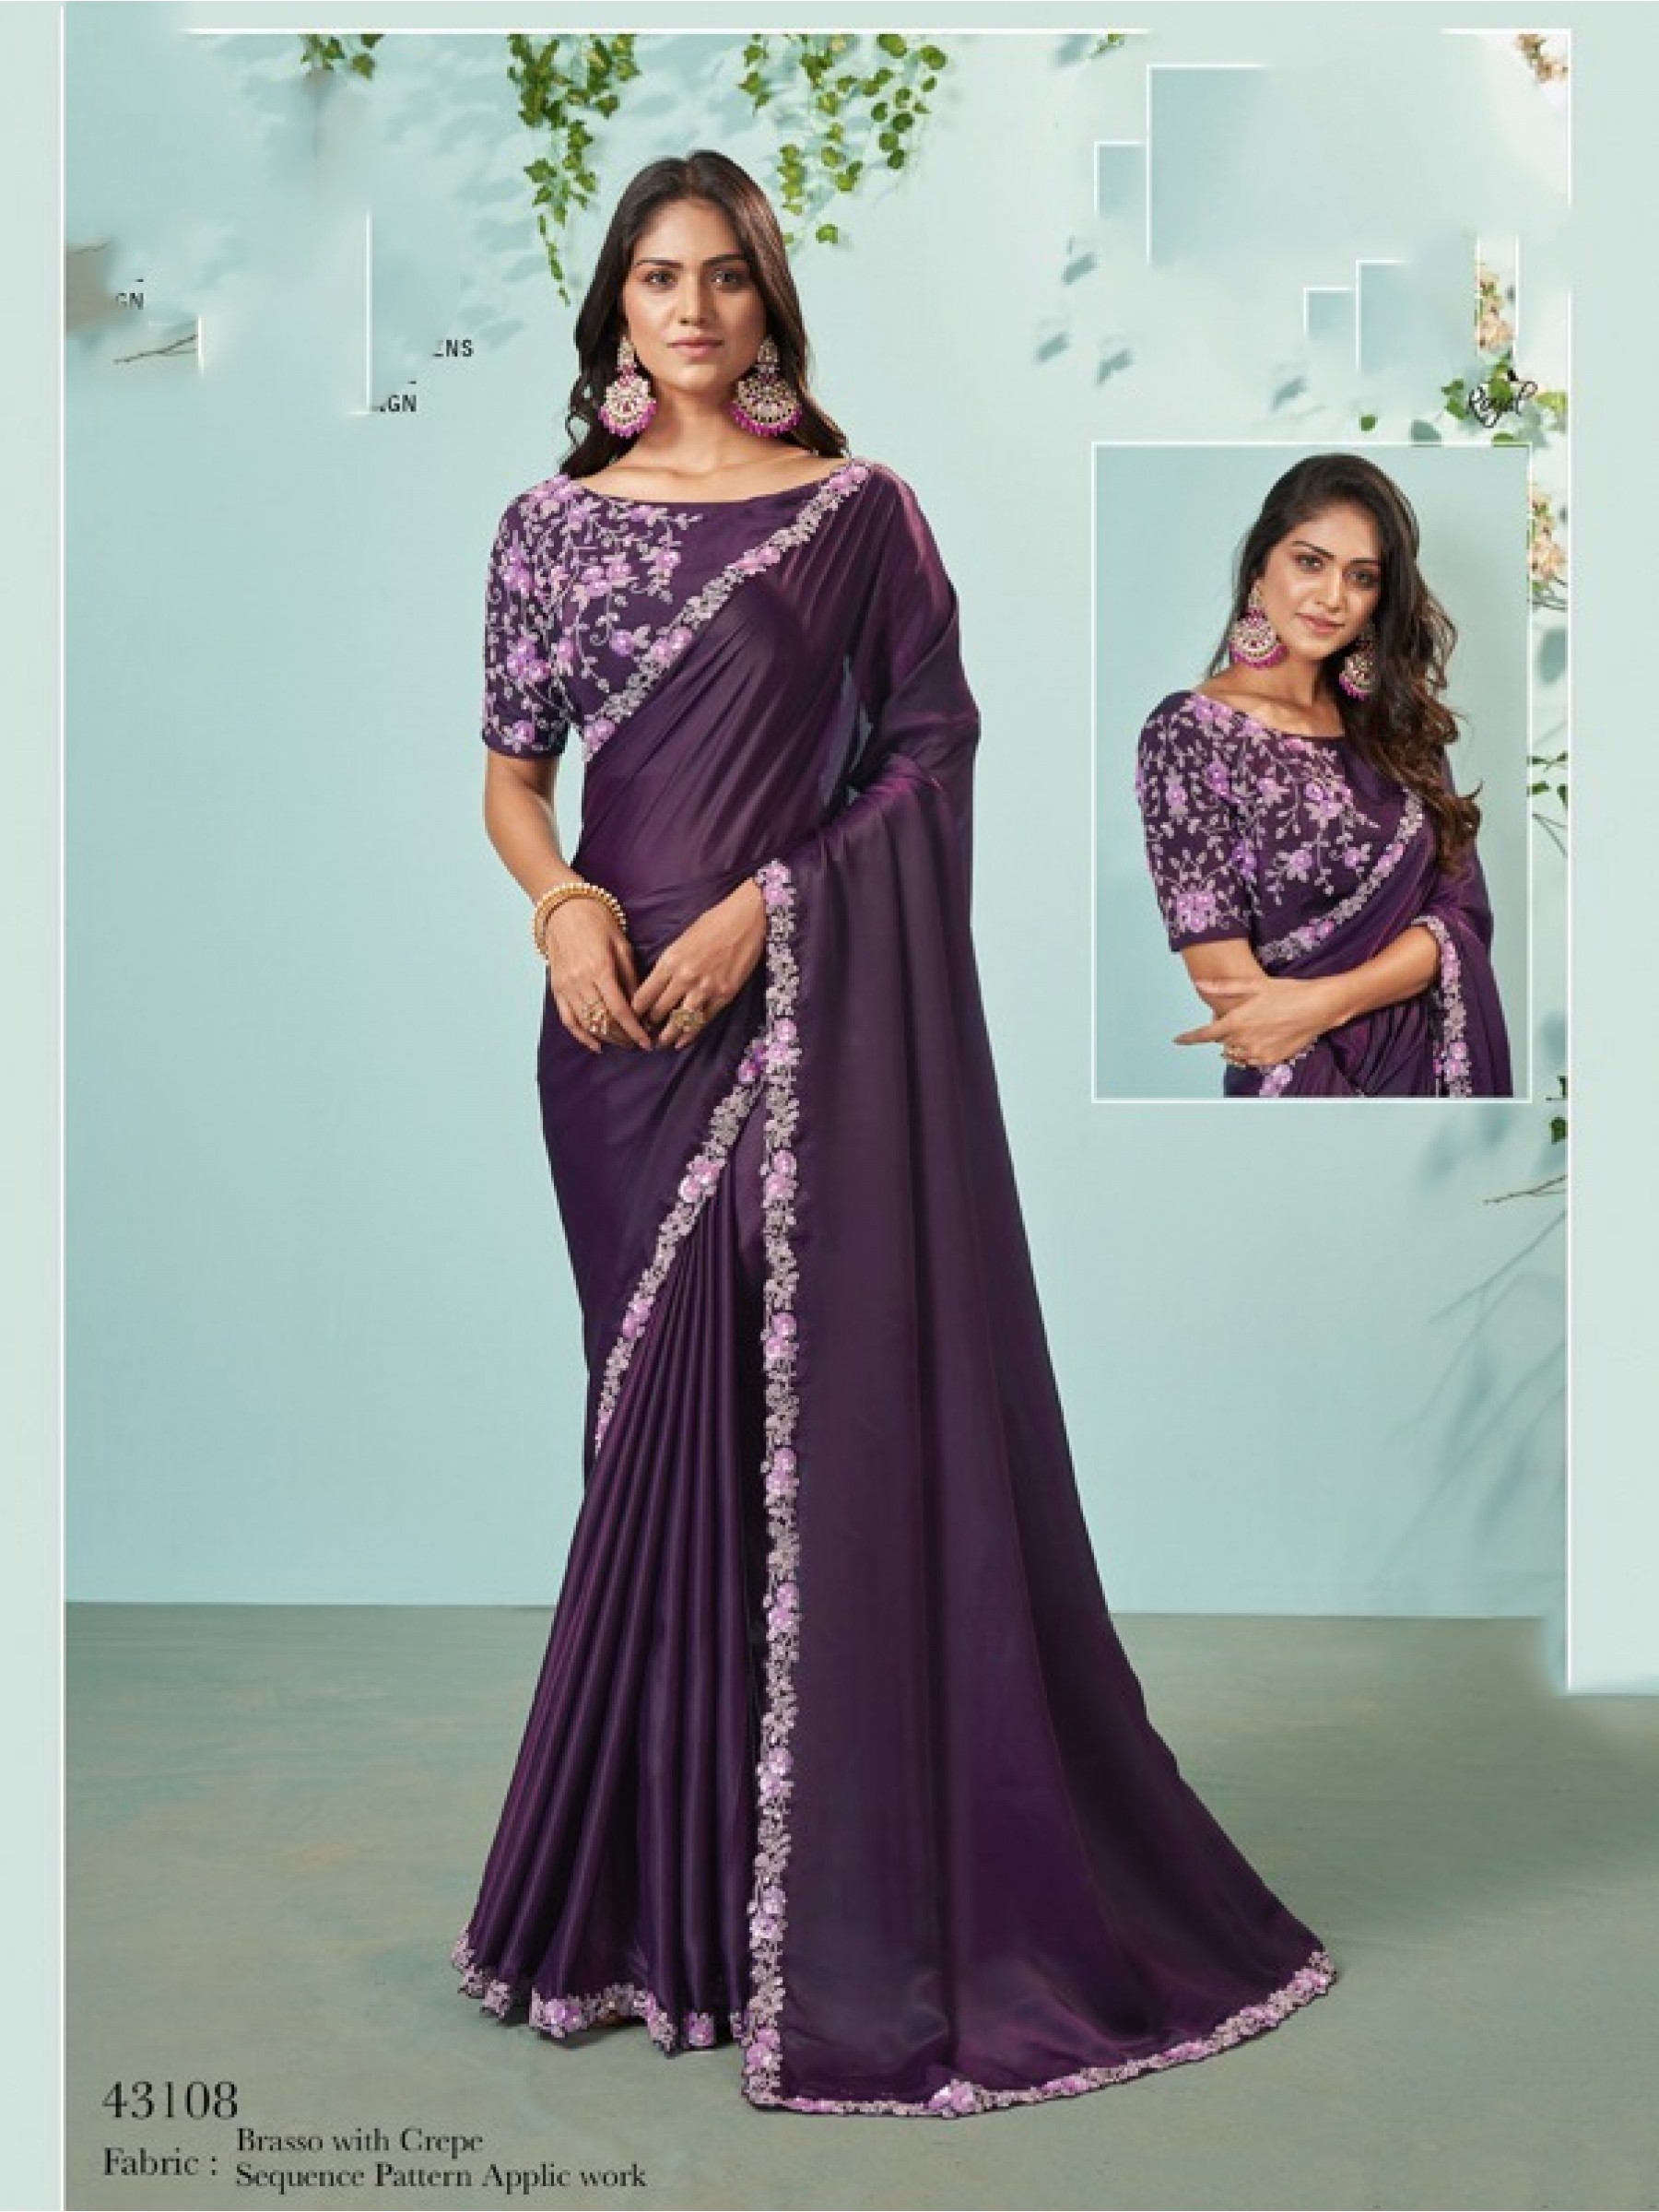 Silk Crape Saree In Purple Color With Embroidery Work